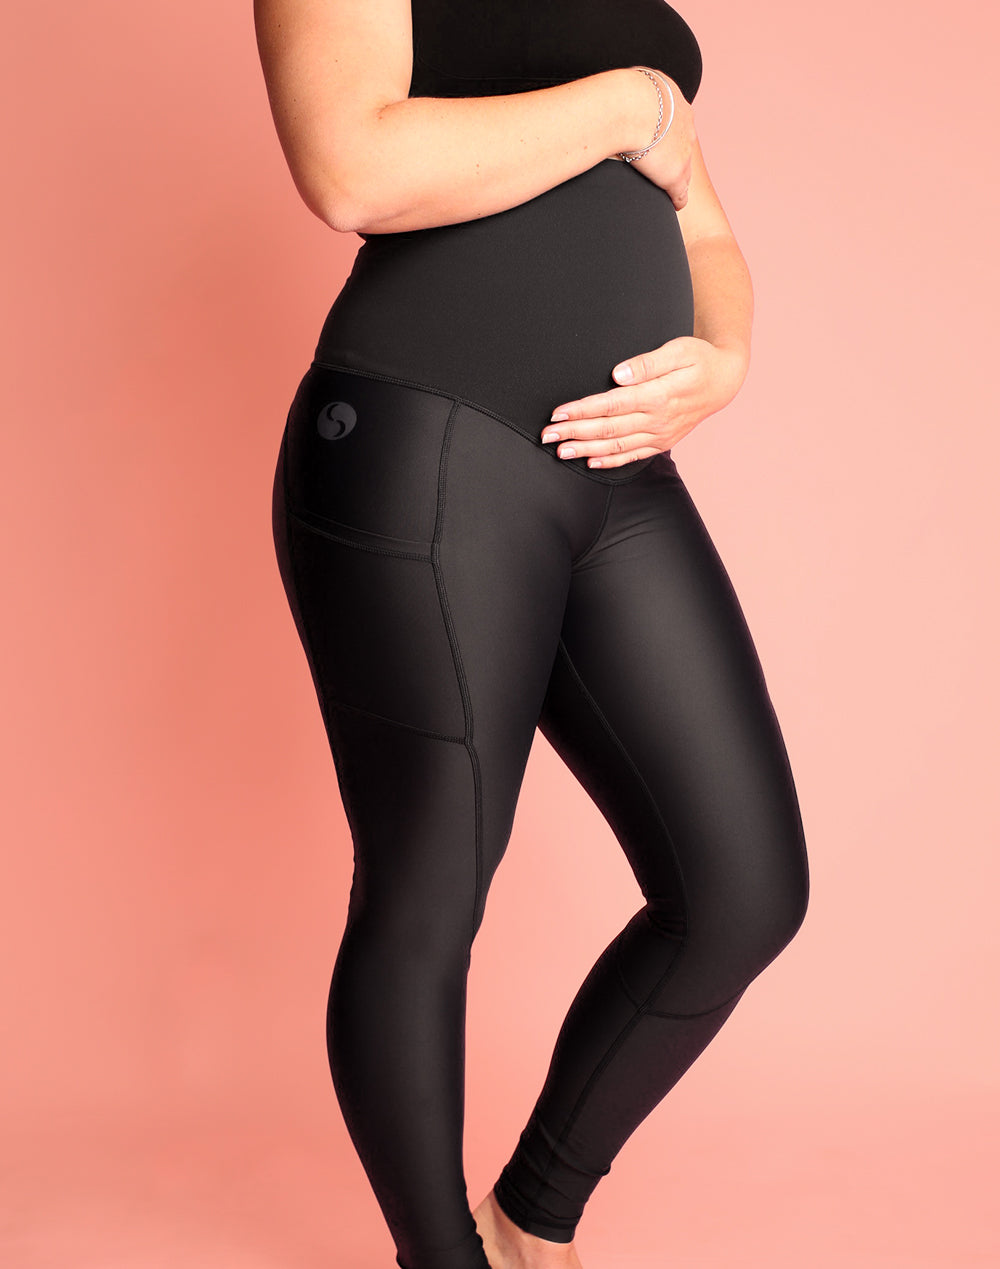 2nd Trimester: Leggings - justpeachy.co - the official blog of Chia